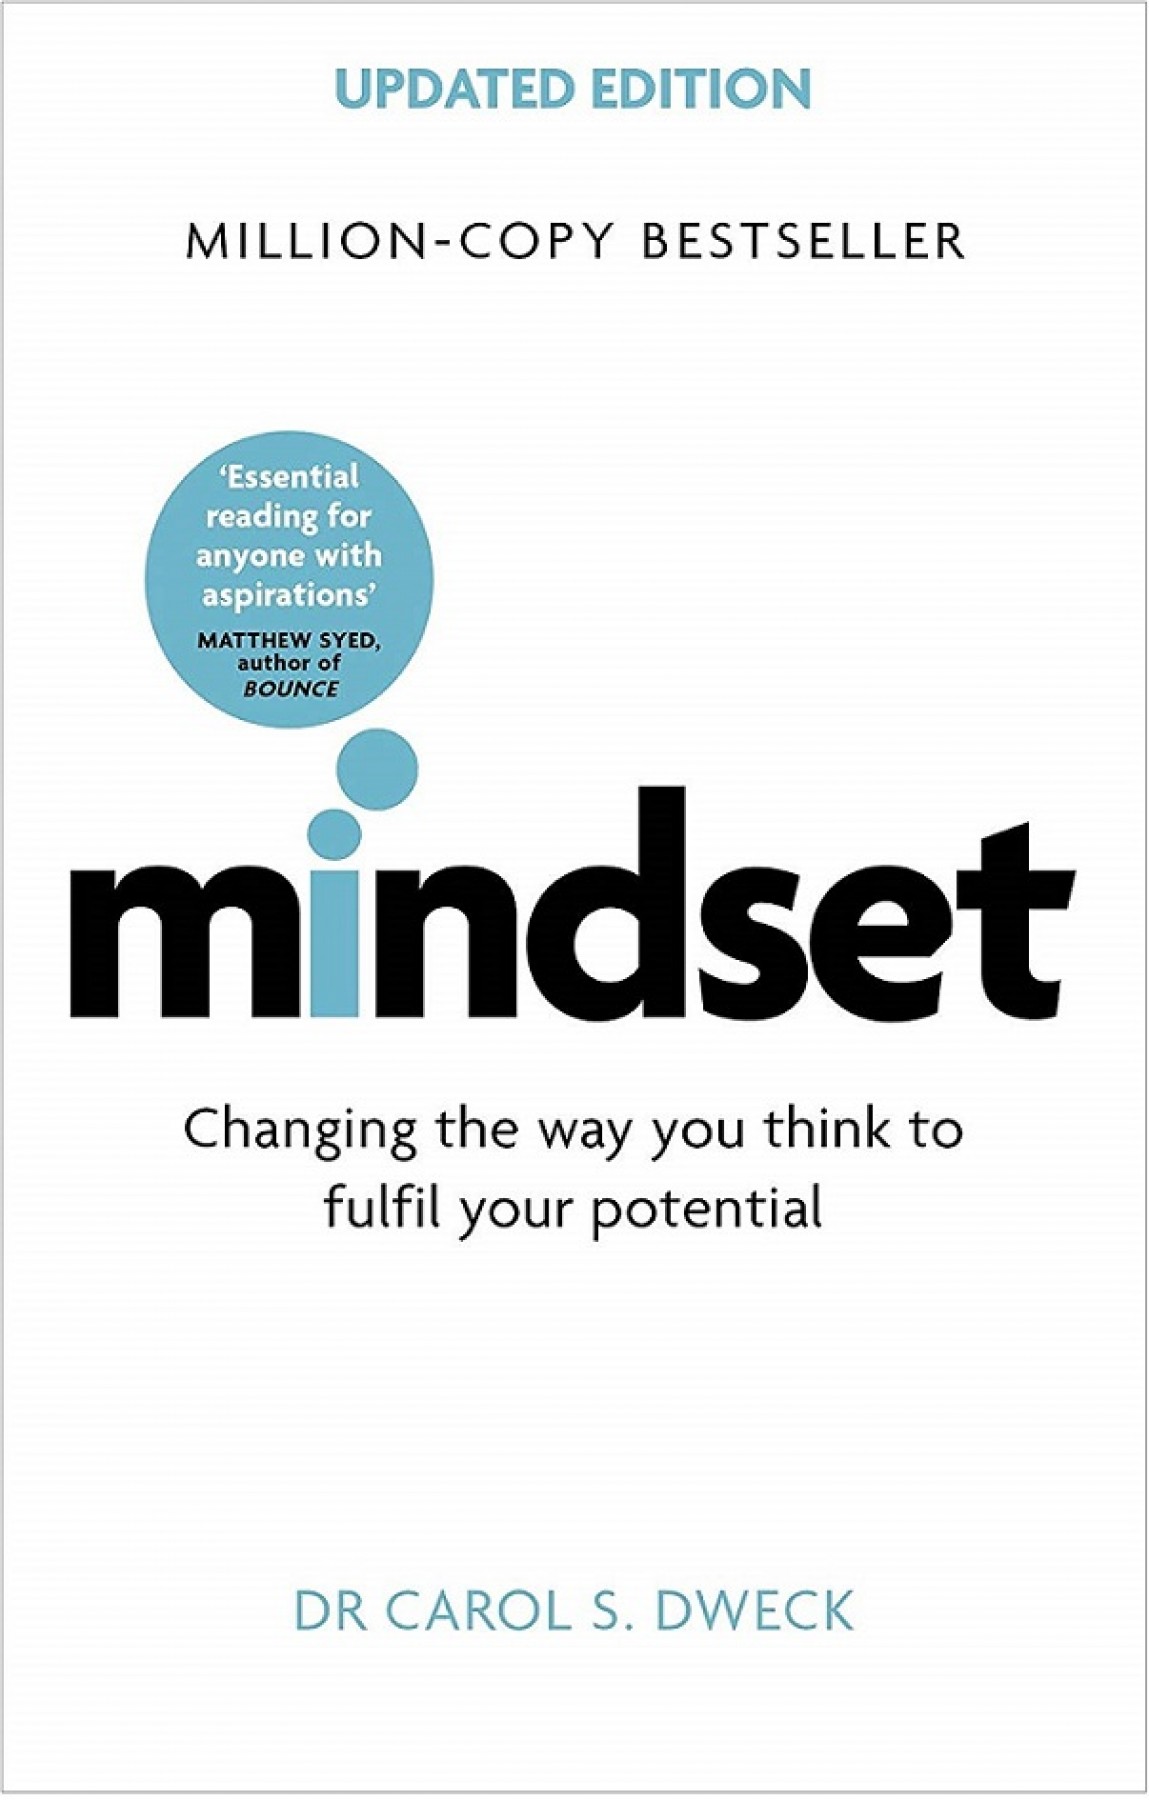 Mindset: Changing the way you think to fulfil your potential